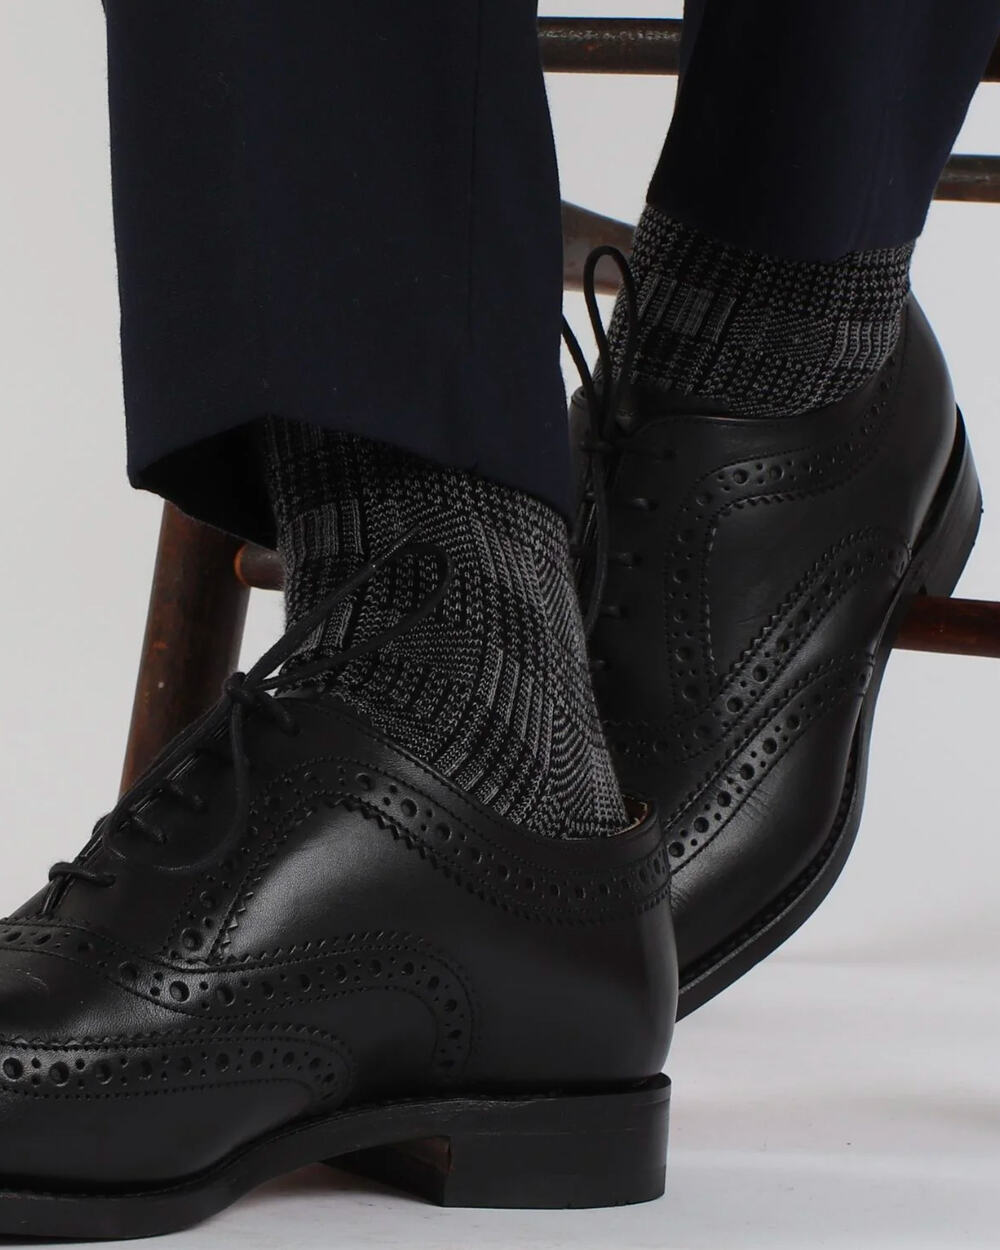 Man wearing luxury charcoal check Corgi socks on feet with navy tailored pants and black leather brogues